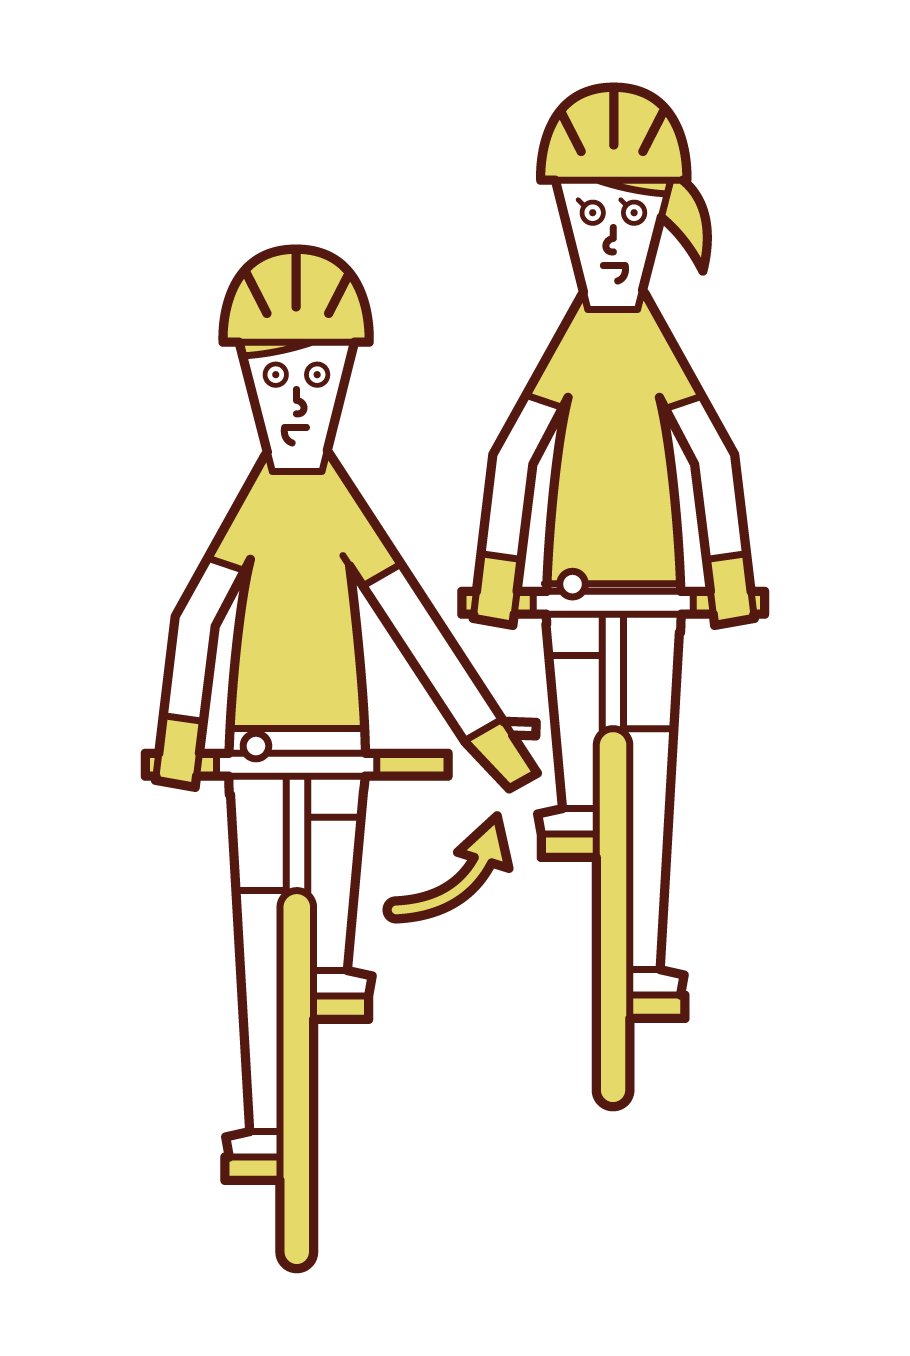 Illustration of a bicycle hand signal and a man who has you go ahead